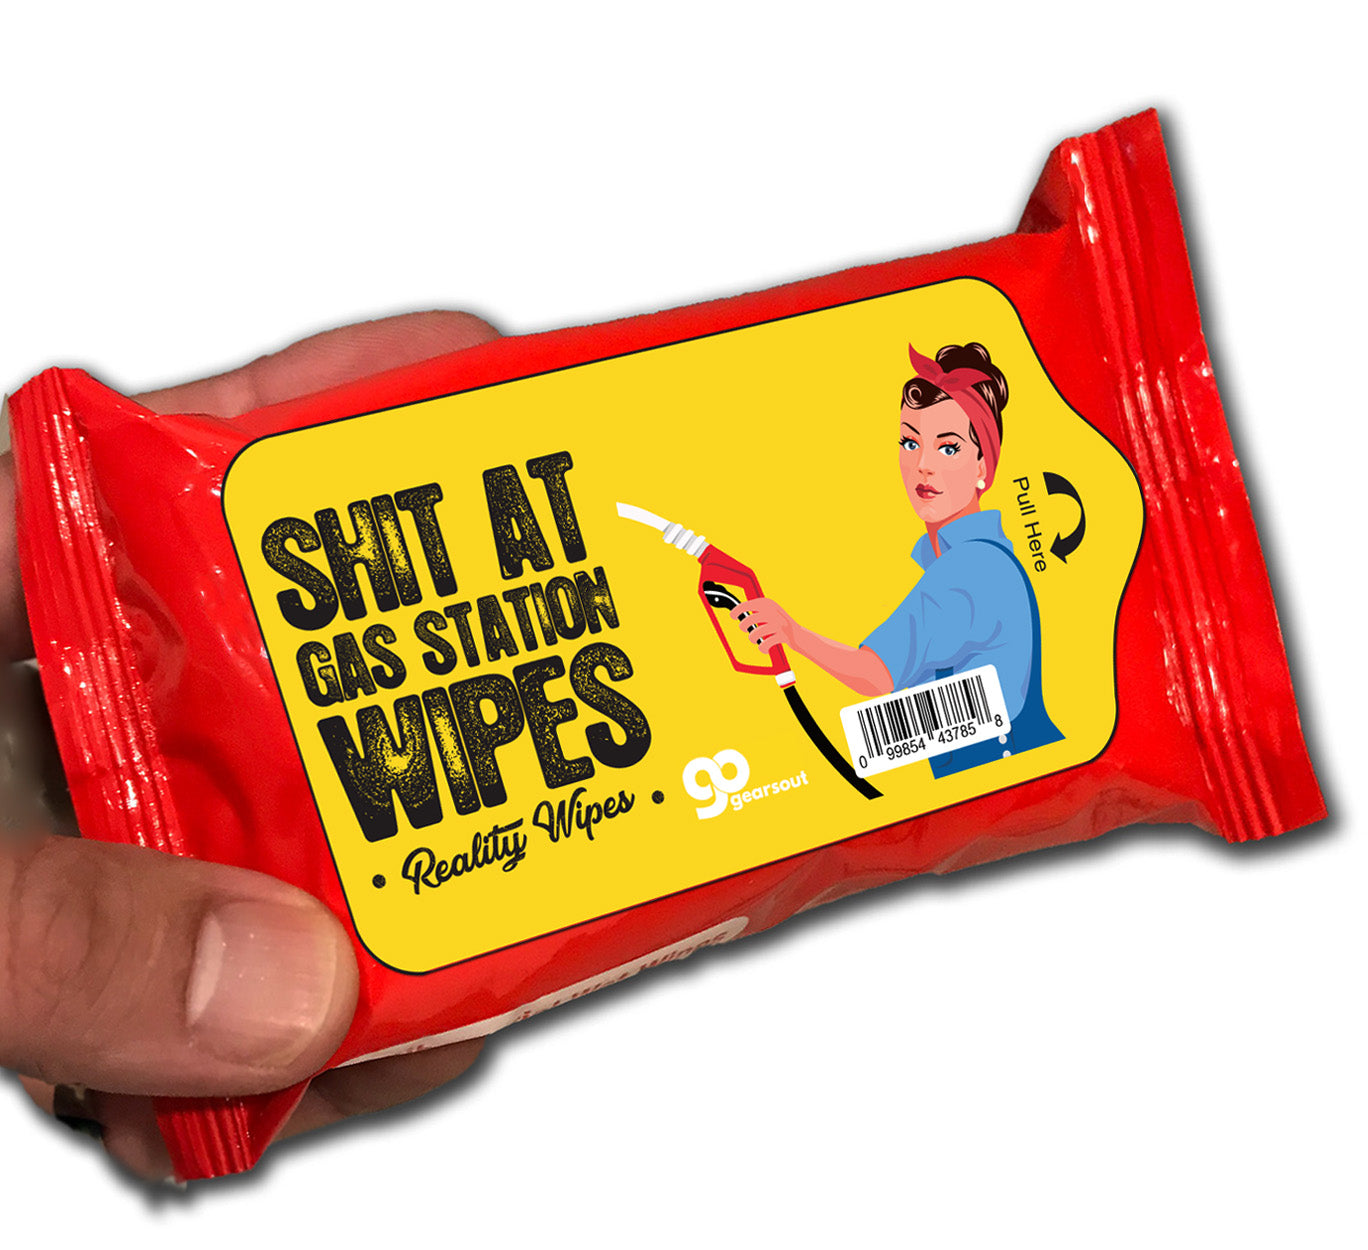 Shit at Gas Station Wipes